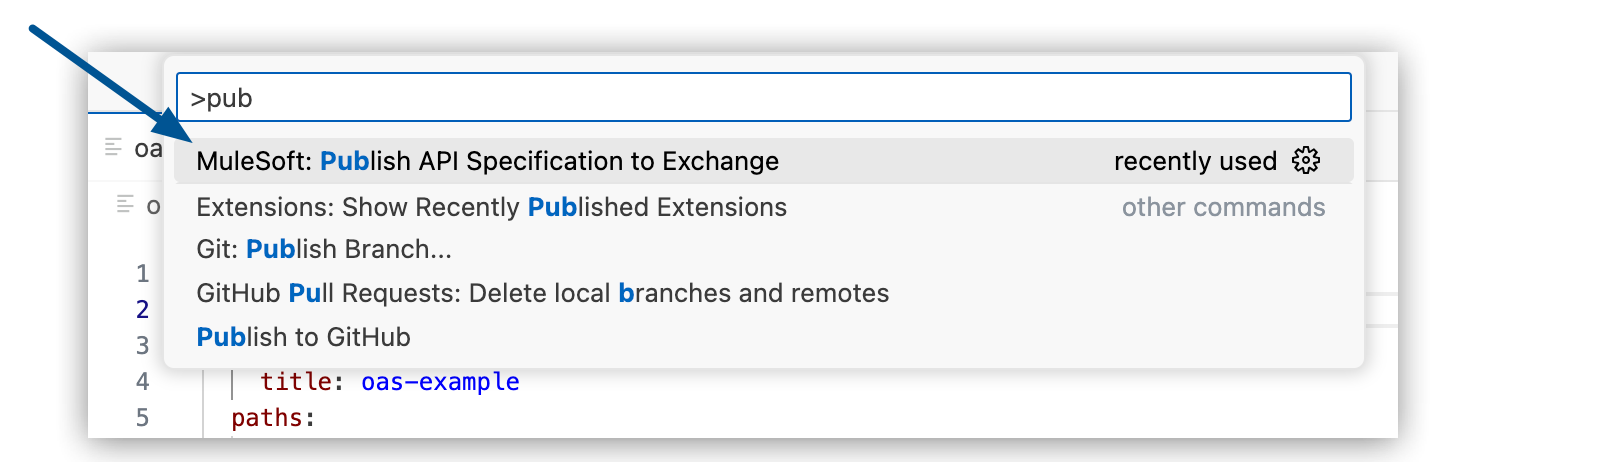 MuleSoft: Publish API Specification to Exchange highlighted in Command Palette